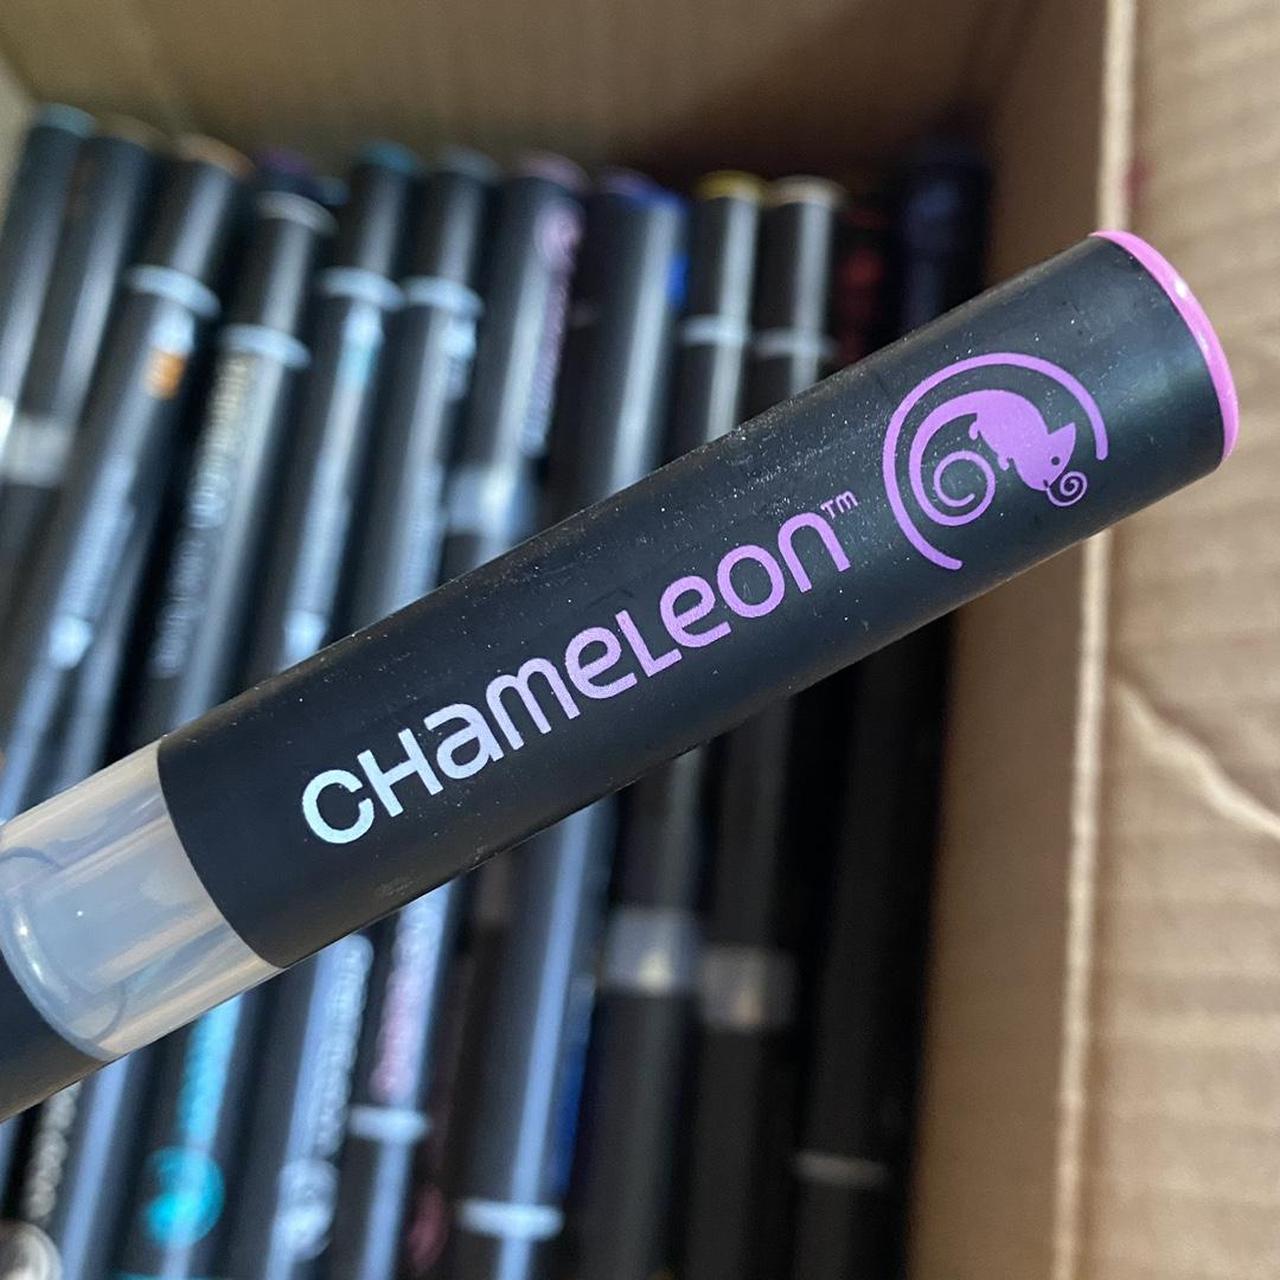 FREE SHIPPING Barely used chameleon markers in great - Depop